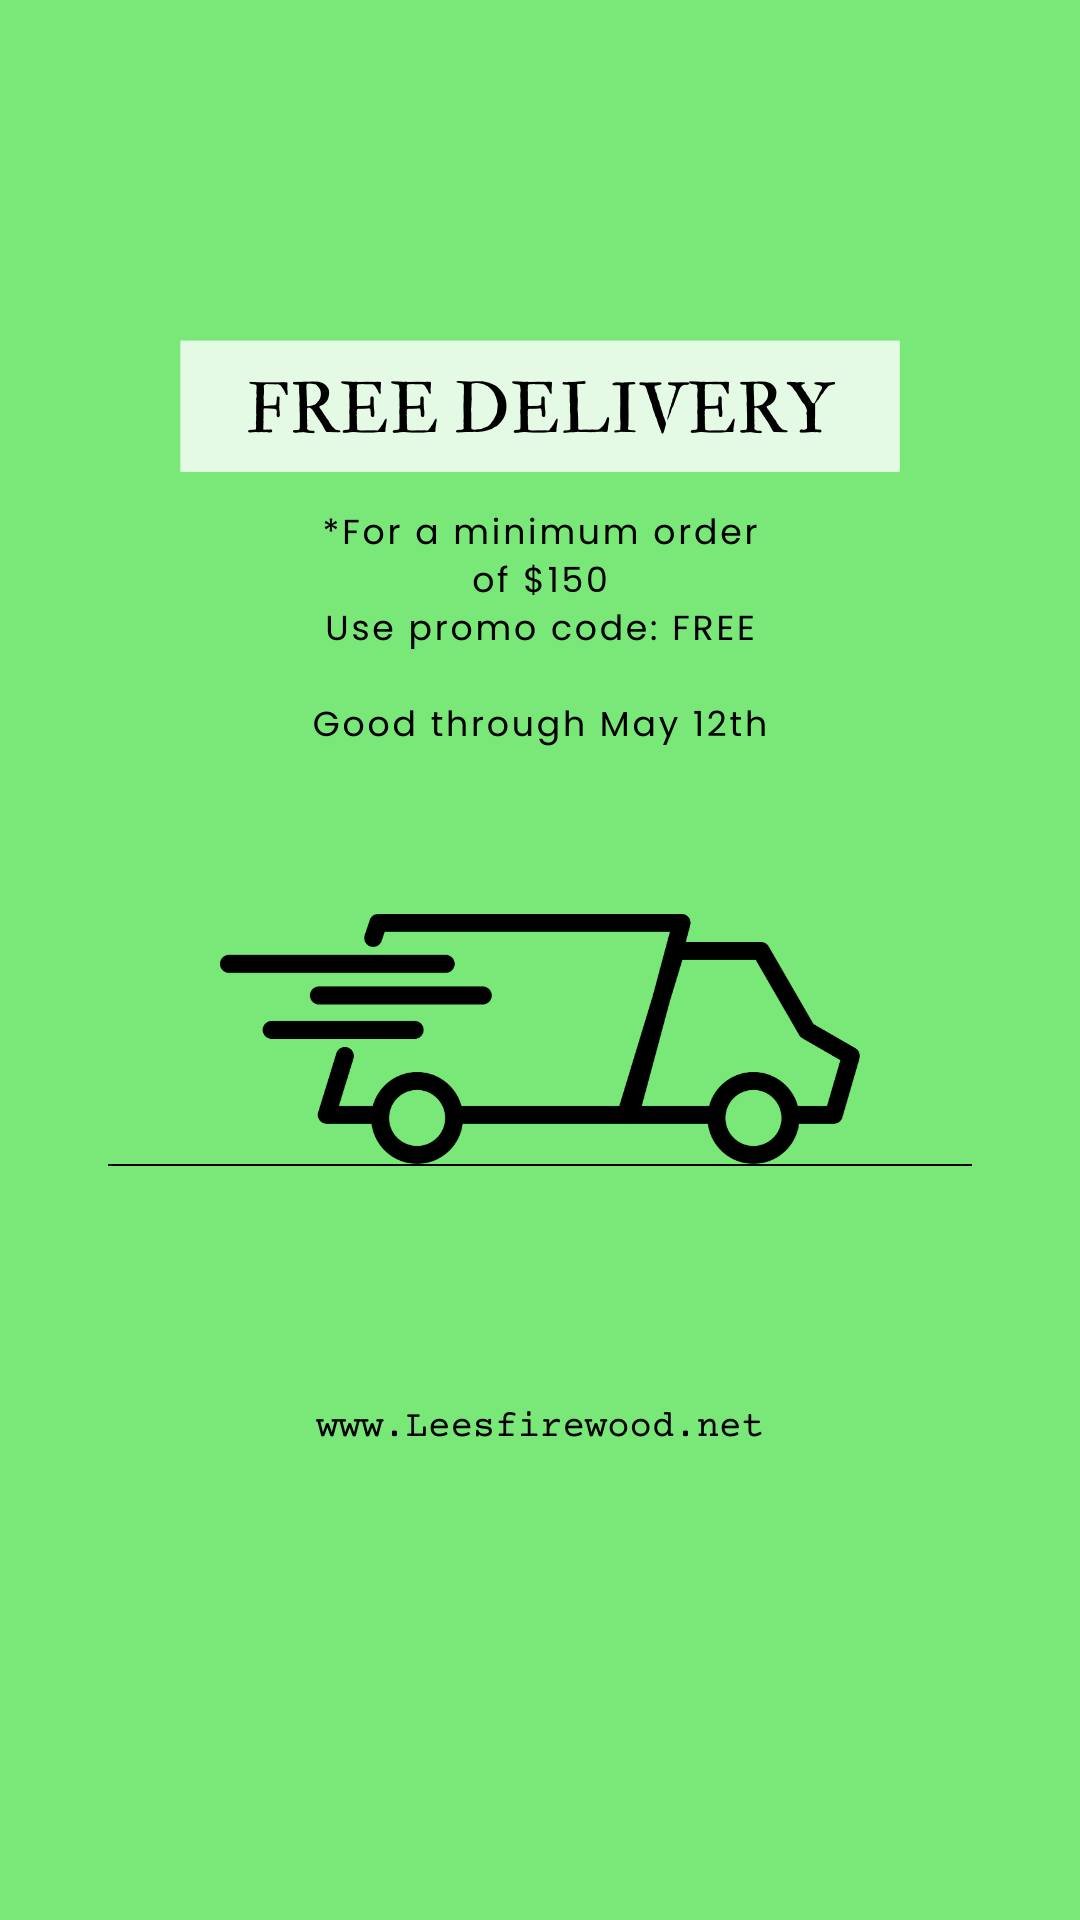 It's back until Mothers Day May 12th.

Start your next order online 👉 leesfirewood.net
&mdash; in Huntersville.